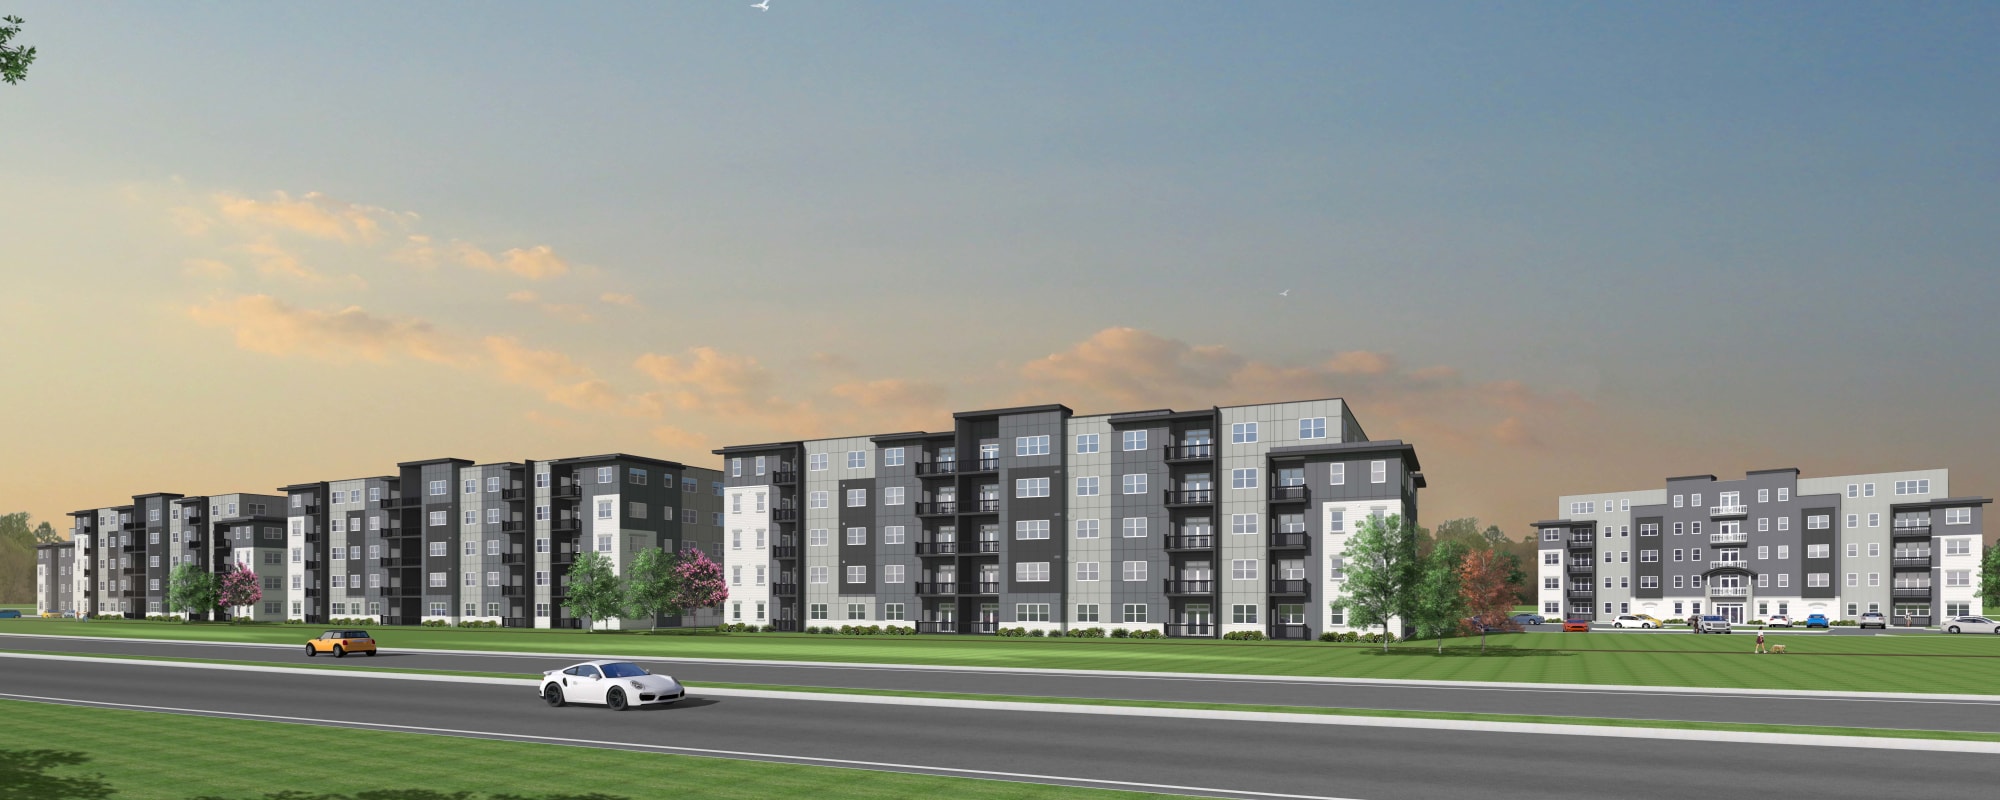 Coming Soon Five 43 Apartments at Peak Management in Lutherville, Maryland